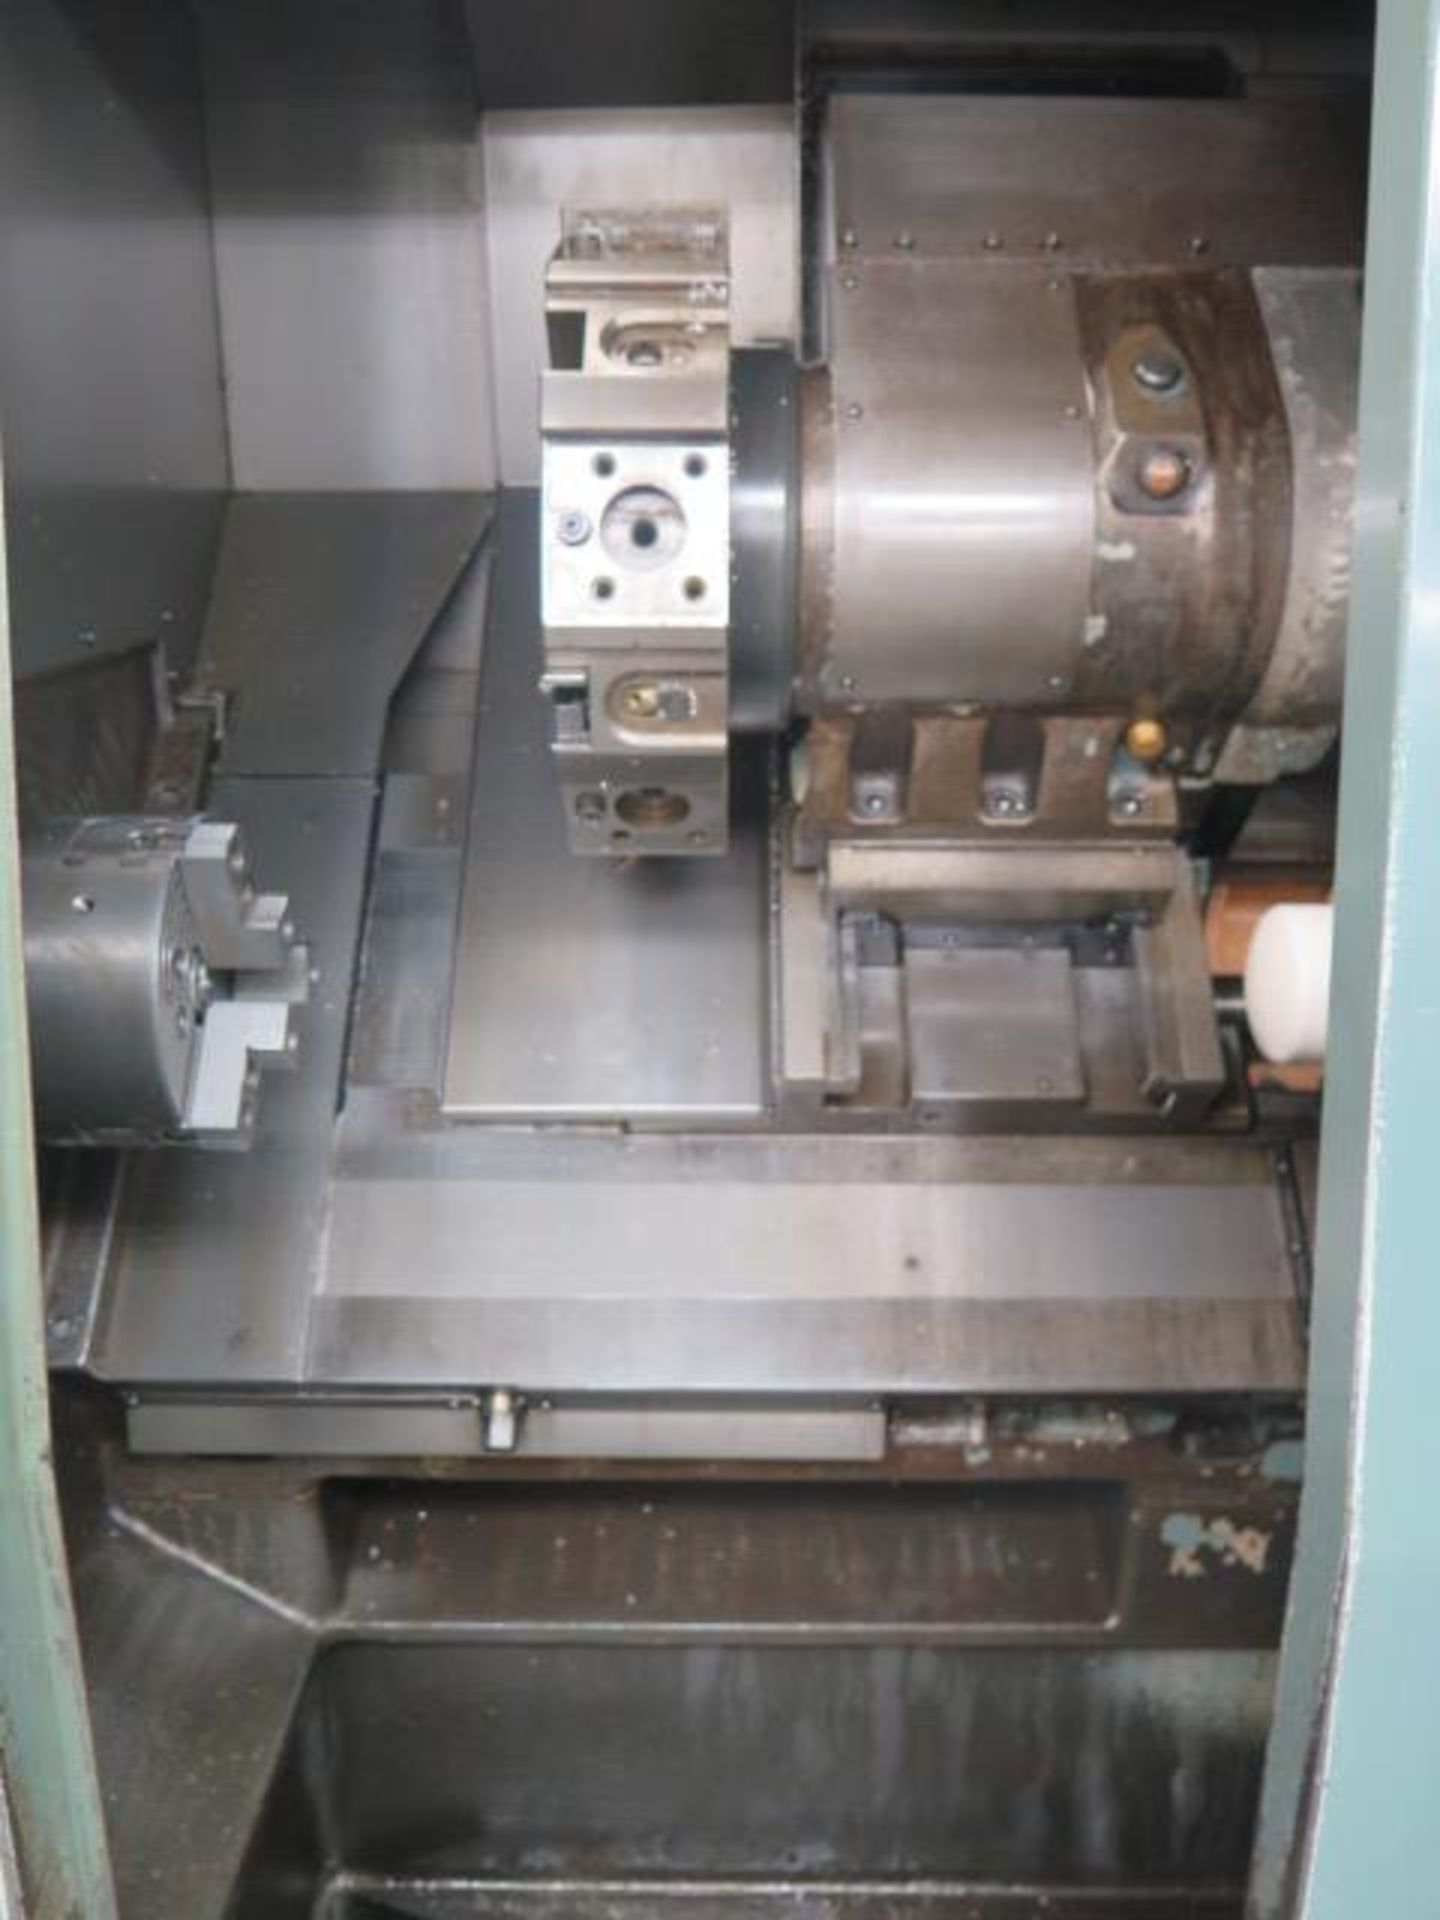 Mori Seiki SL-3A CNC Turning Center s/n 3141 w/ Fanuc 6T Controls, 12-Station Turret, SOLD AS IS - Image 4 of 15